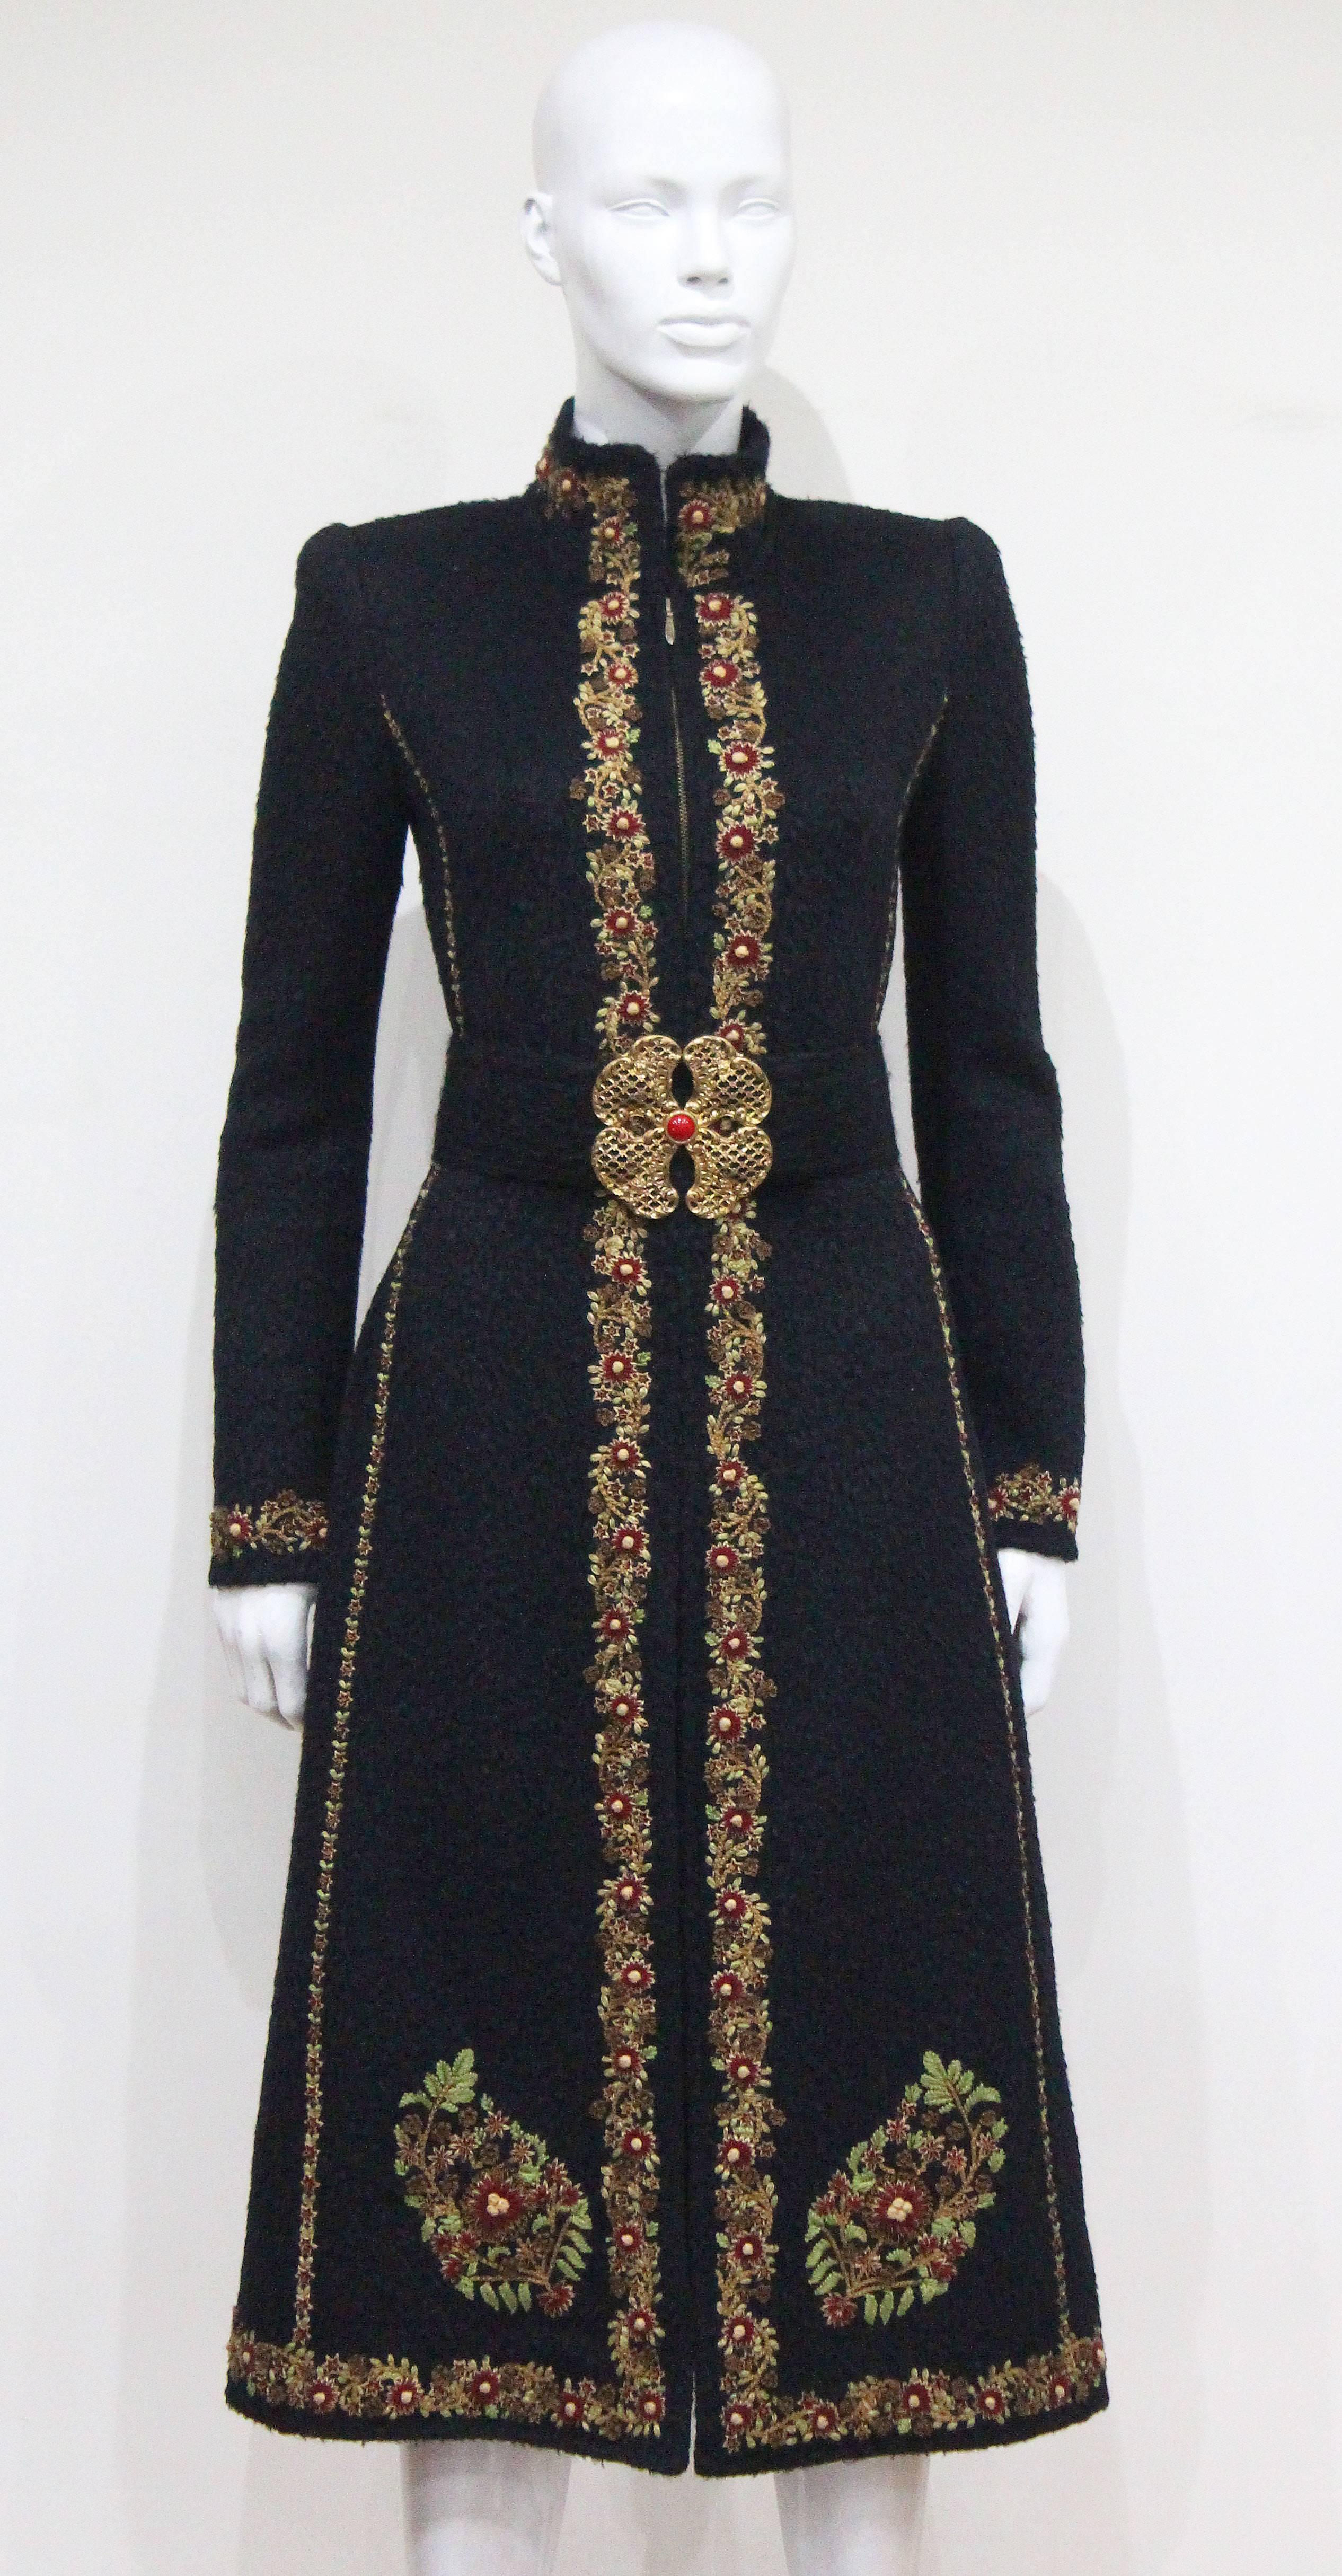 An Oscar de la Renta woollen coat from the 1990s. The coat features intricate hand stitched embroidery throughout and matching belt with metal clasp. 

Fr 38  